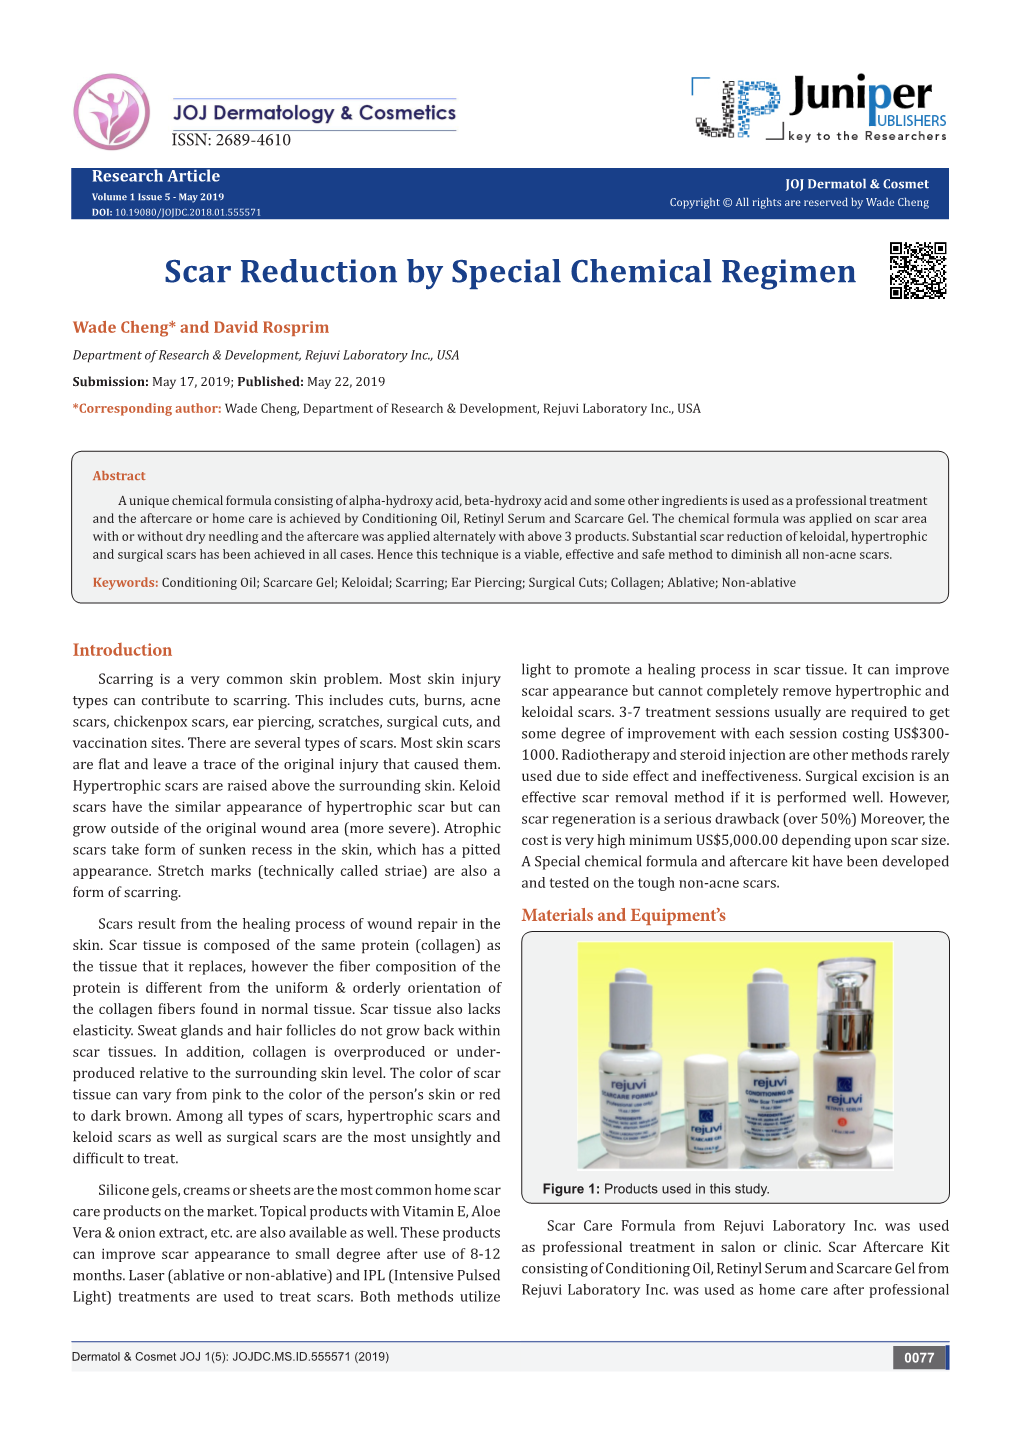 Scar Reduction by Special Chemical Regimen